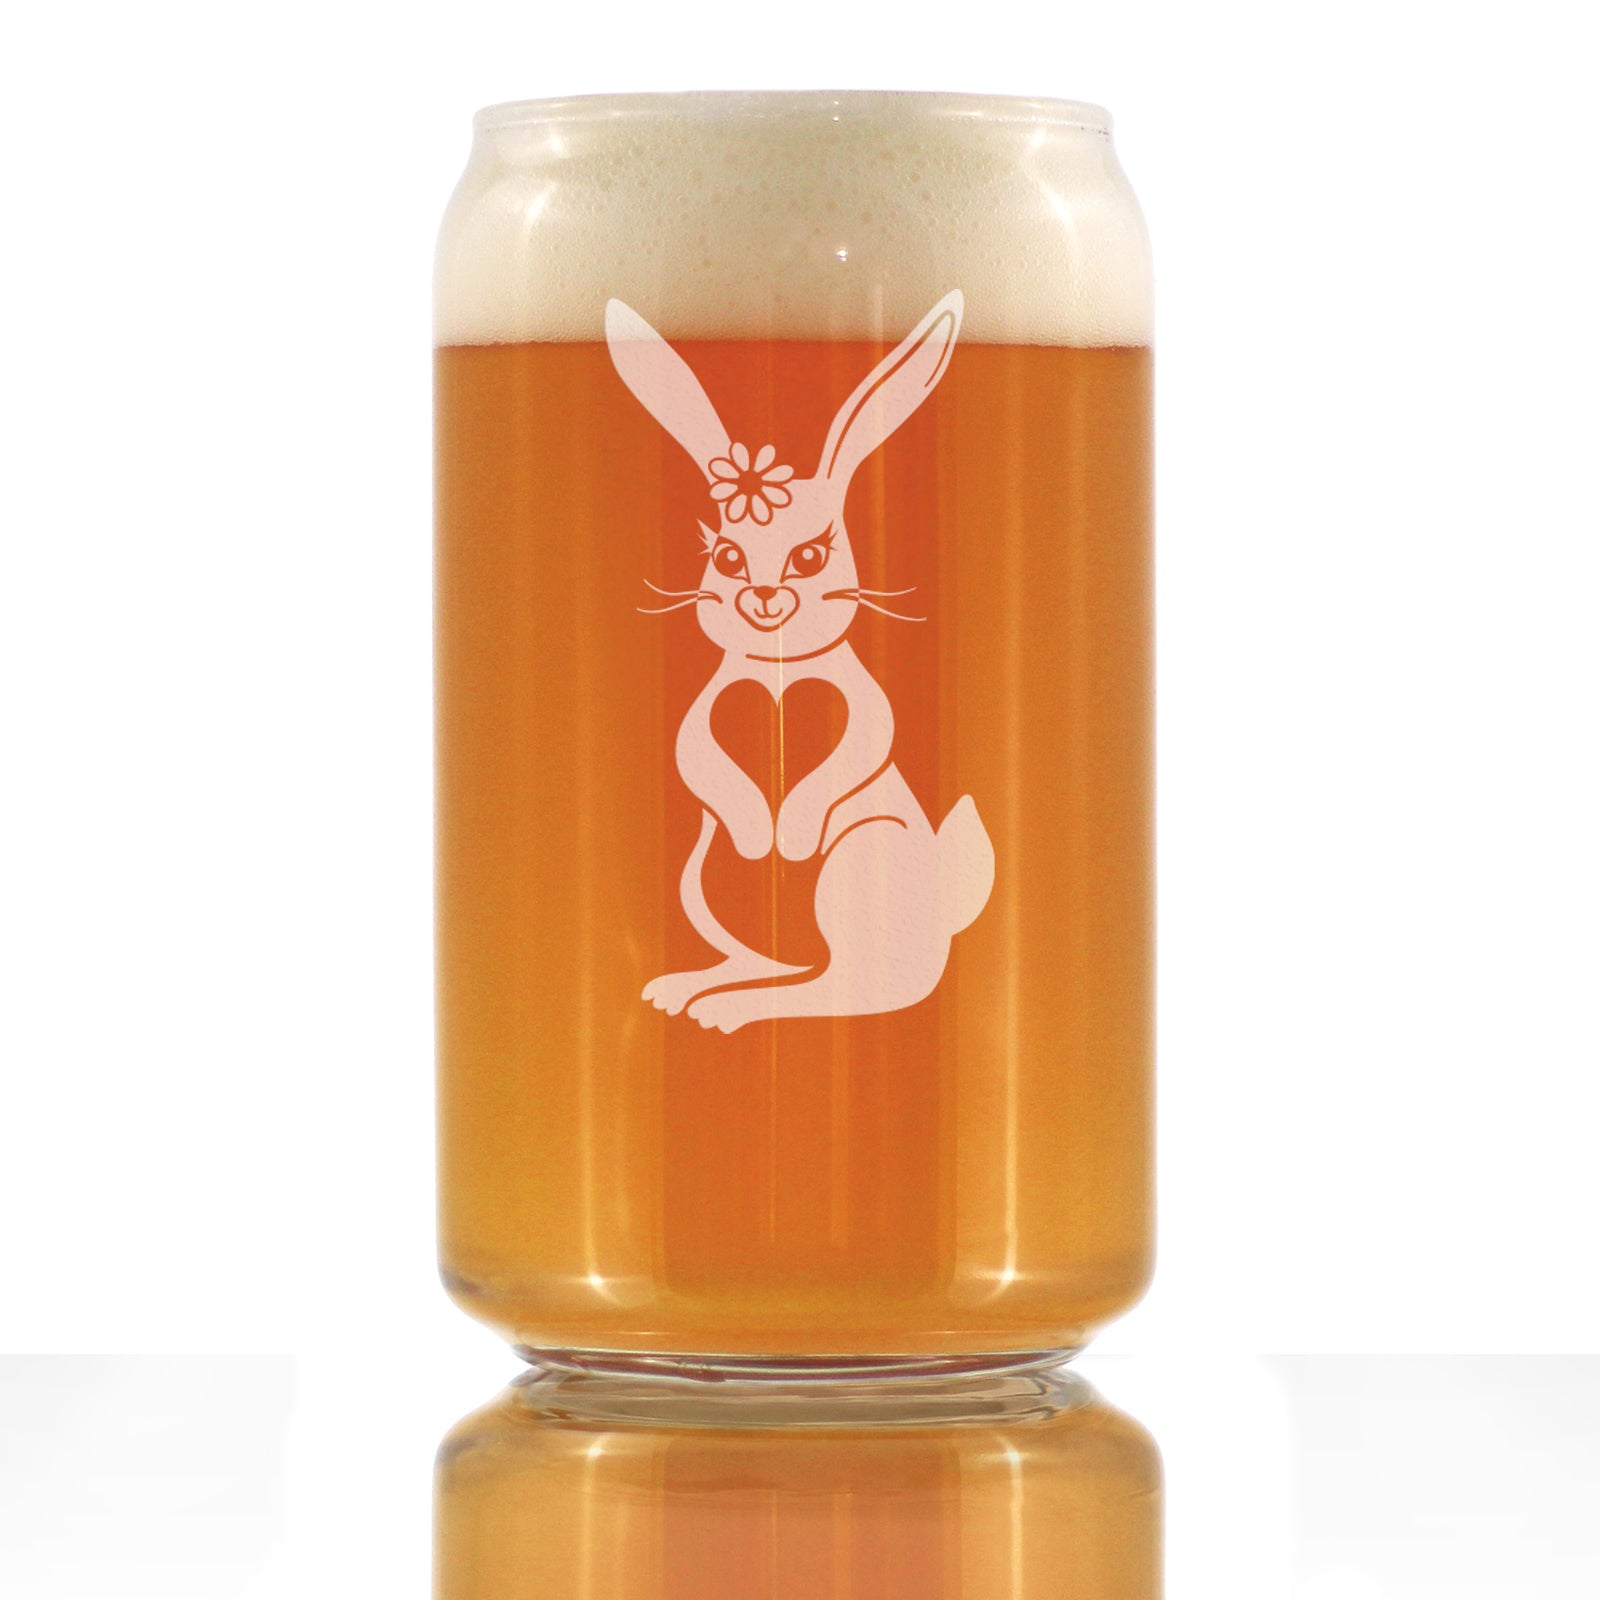 Cute Bunny Rabbit - Beer Can Pint Glass - Hand Engraved Gifts for Men & Women That Love Bunnies